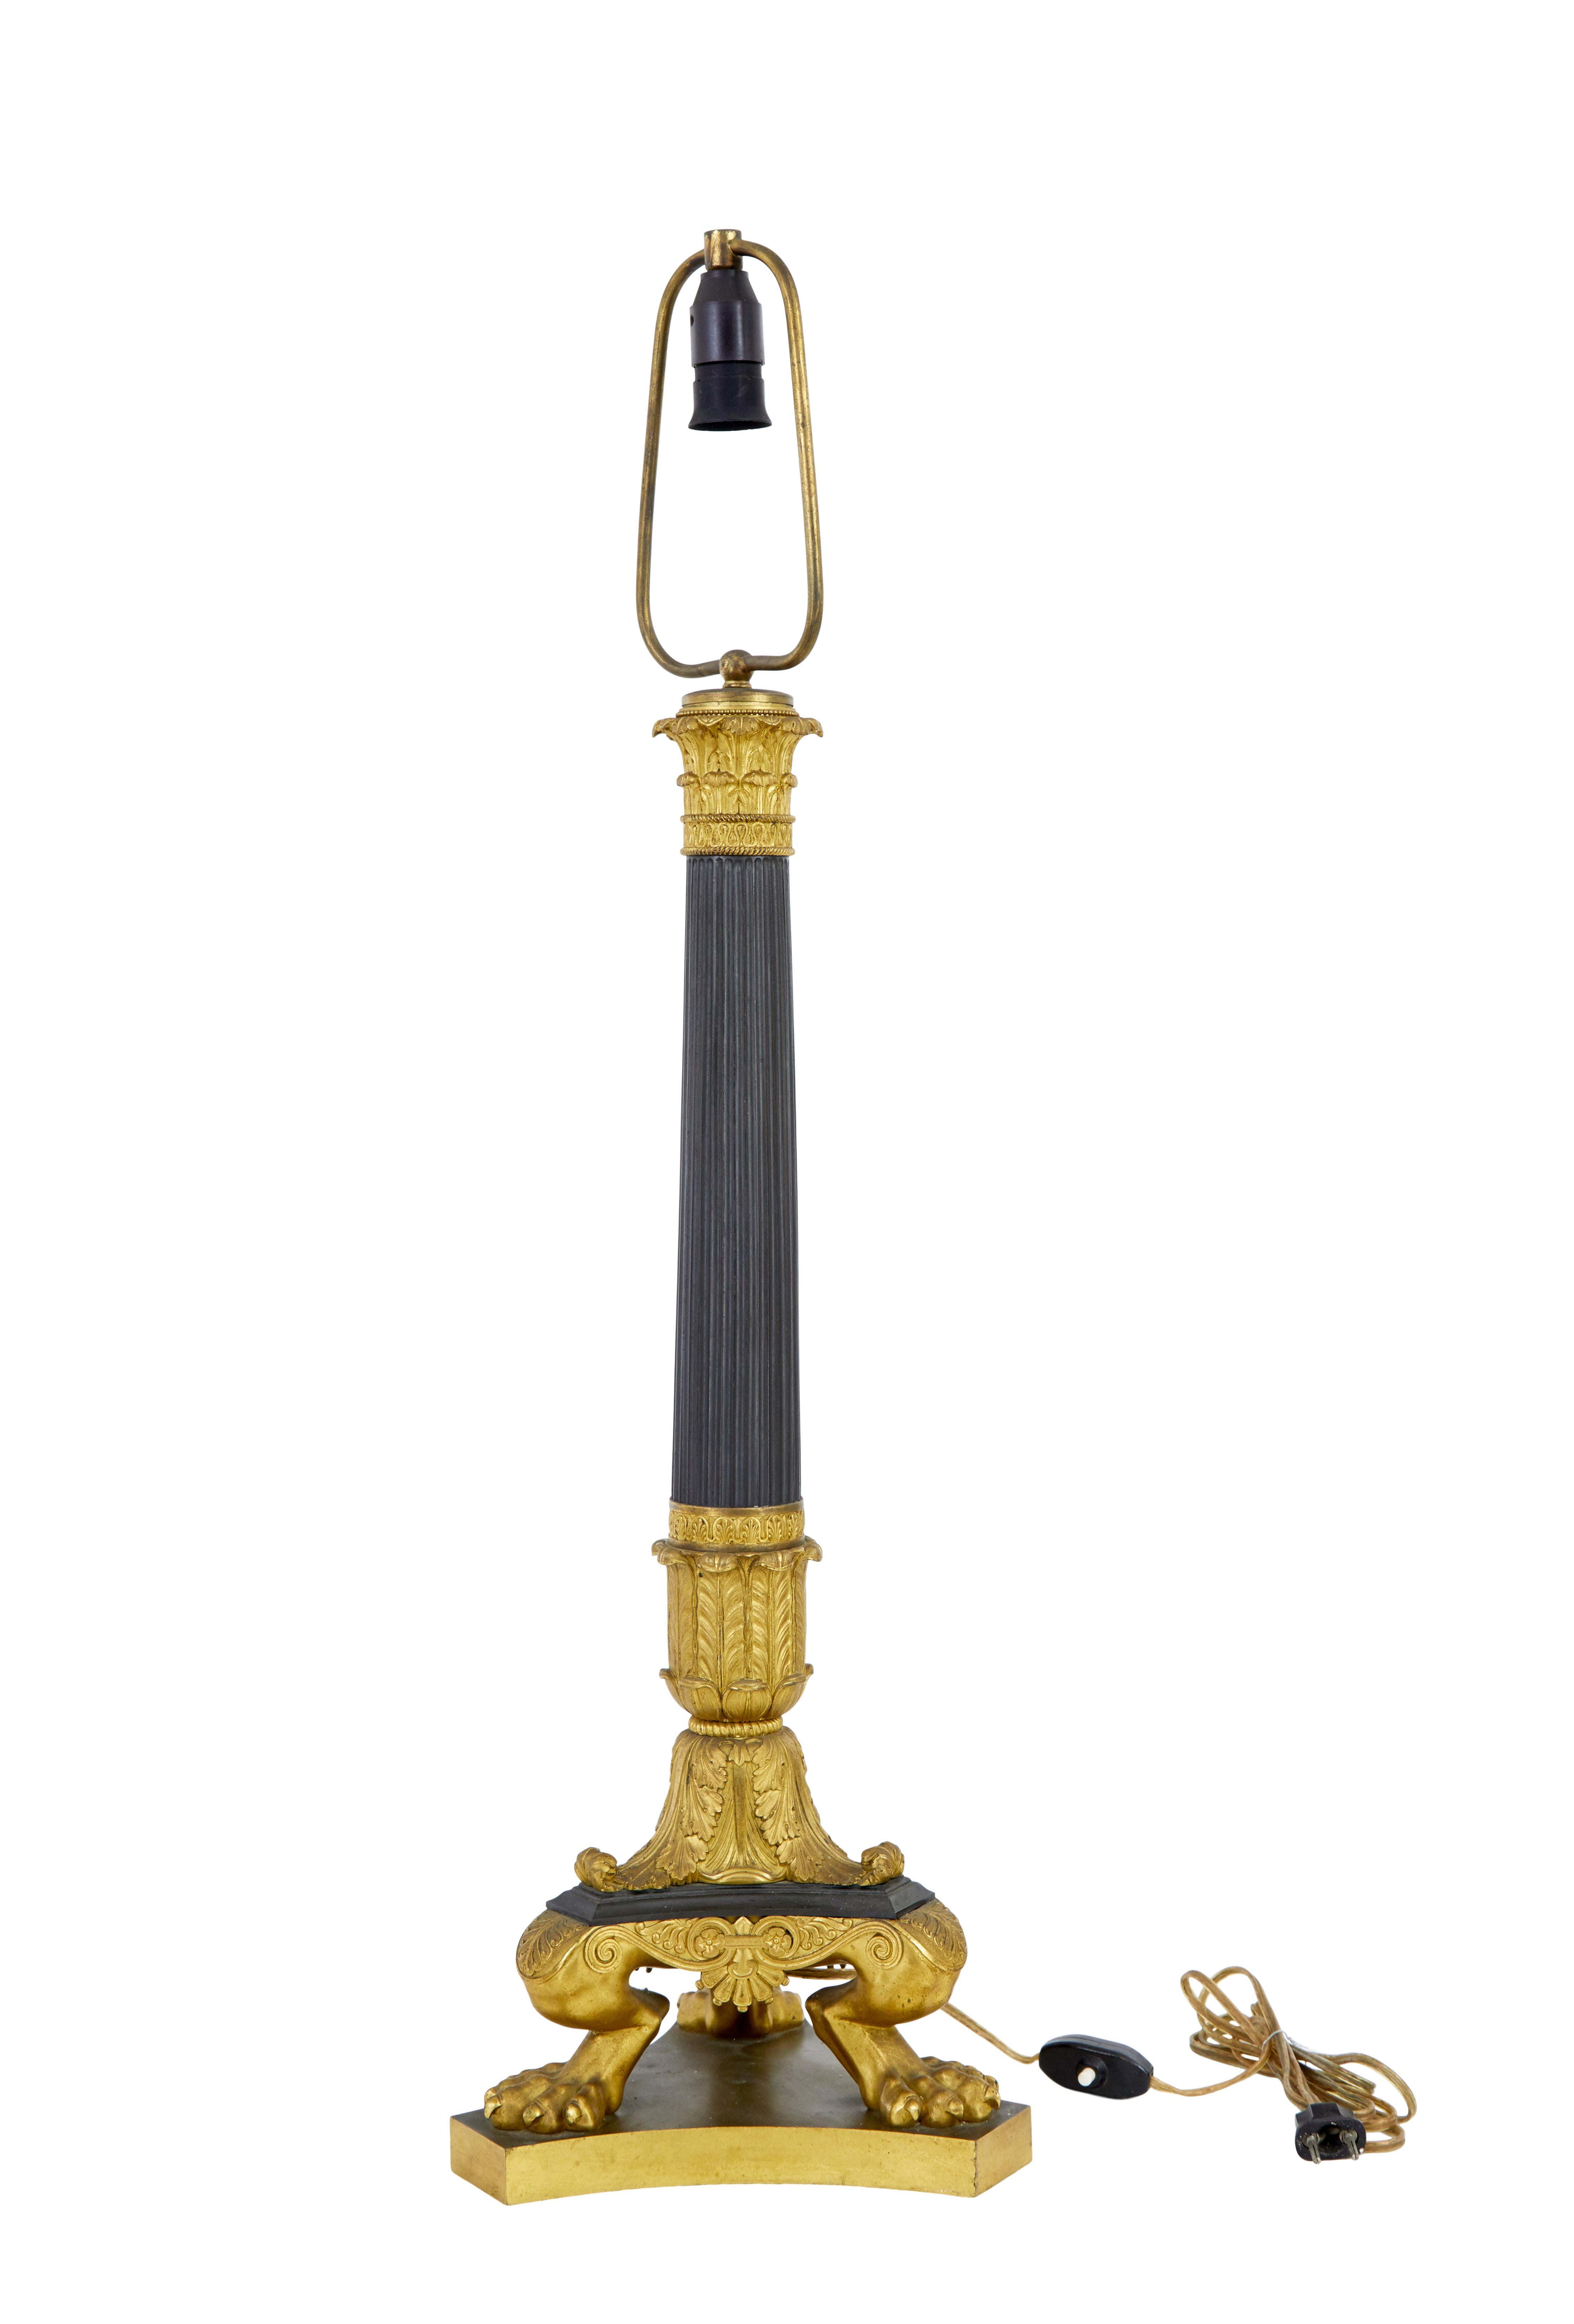 Tall 19th century french empire bronze ormolu lamp, circa 1860.

Here we have a lamp of the finest quality, previously would have been a gas lamp but converted to electricity in the 1930's.

Large lamp with fluted bronze column with triform base,